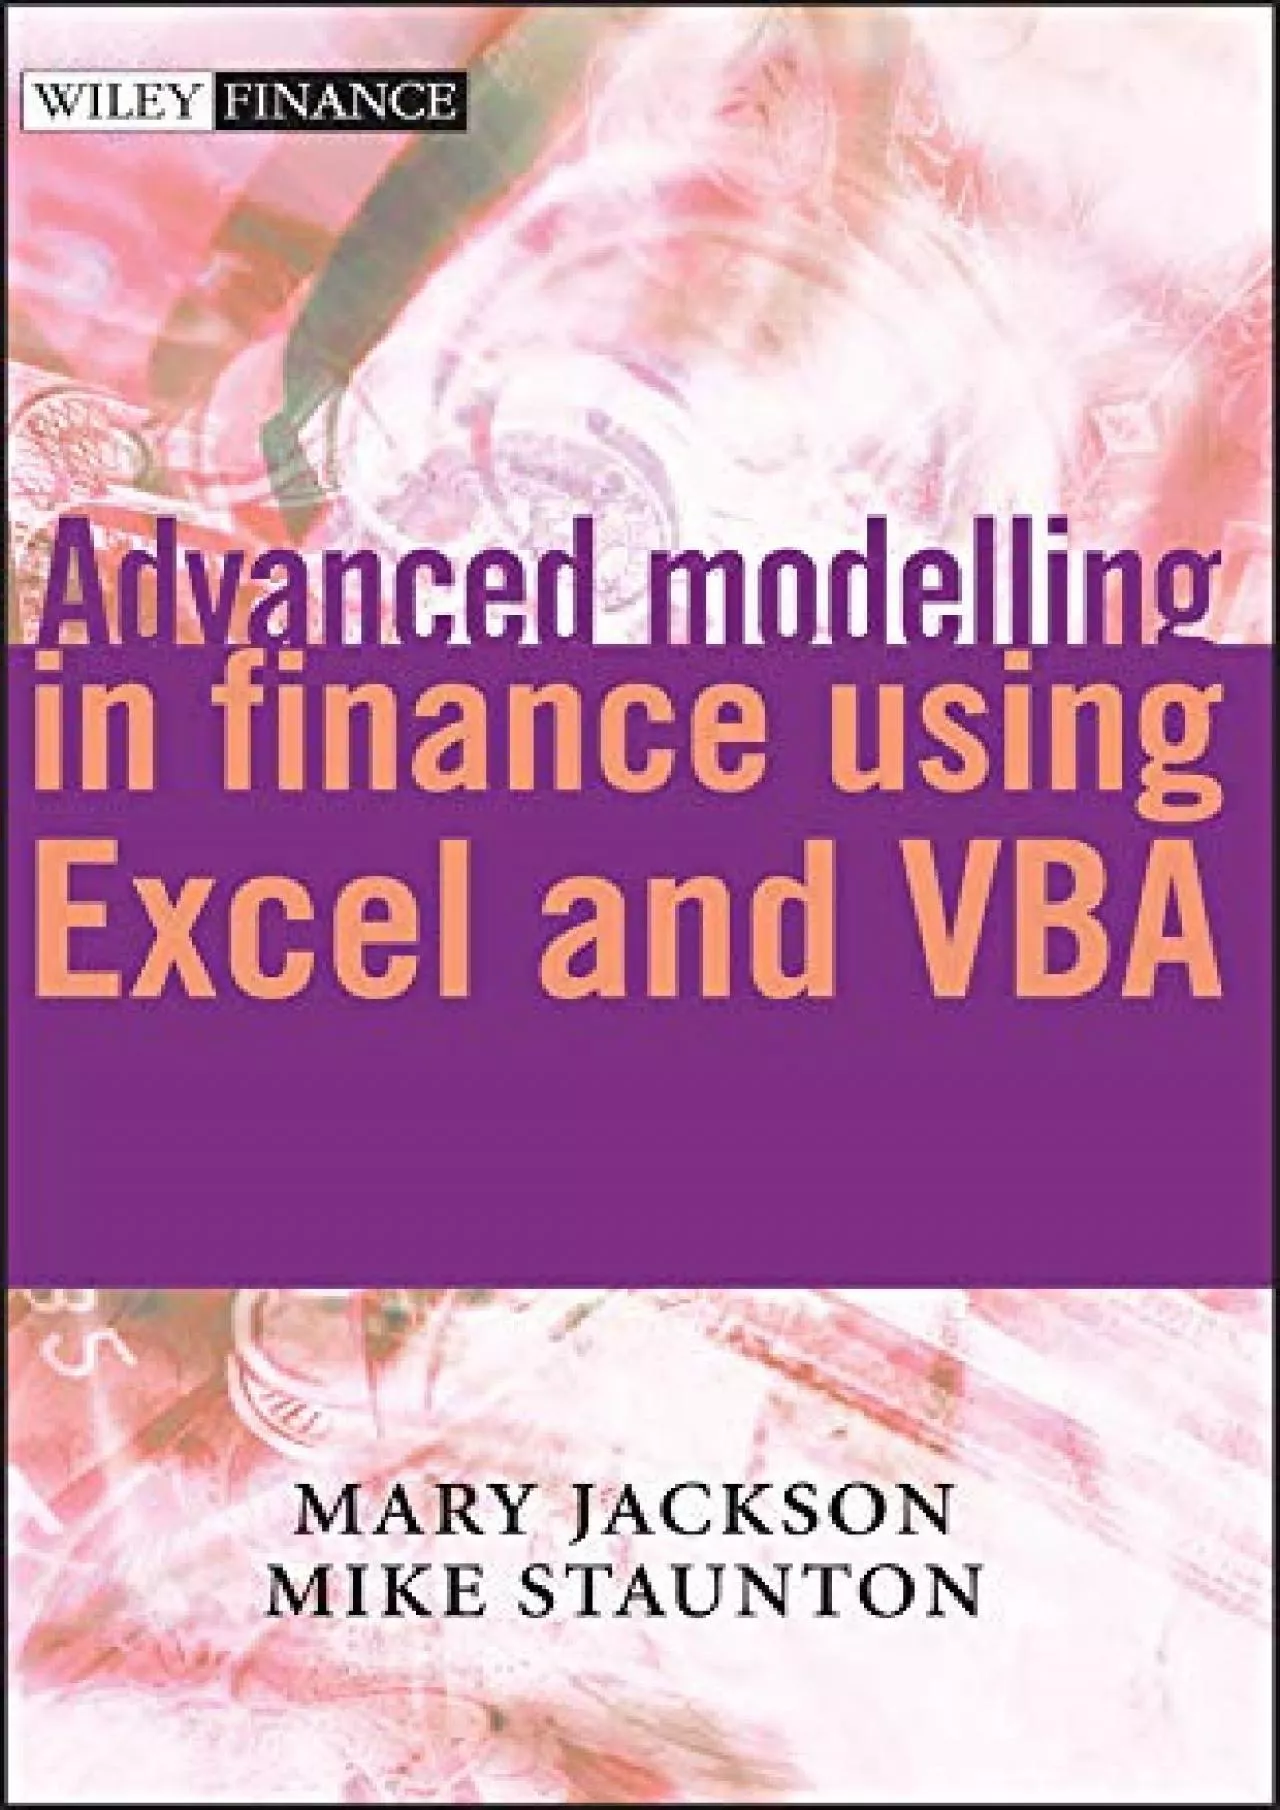 (EBOOK)-Advanced modelling in finance using Excel and VBA